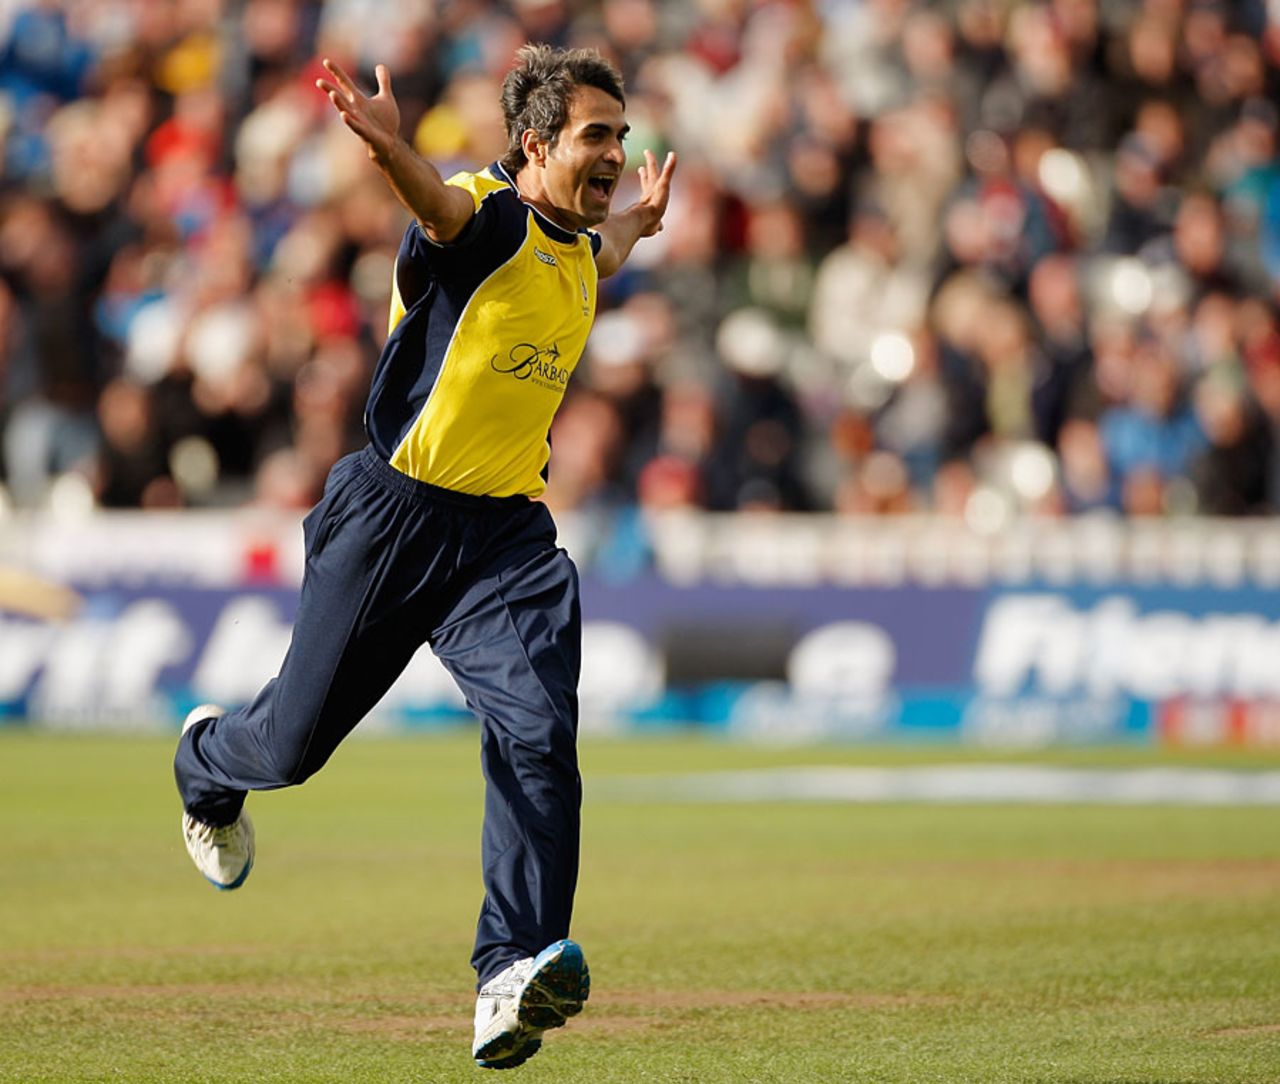 Imran Tahir took two wickets in two balls but it wasn't enough, Hampshire v Somerset, Friends Life t20, 2nd Semi Final, Edgbaston, August 27 2011